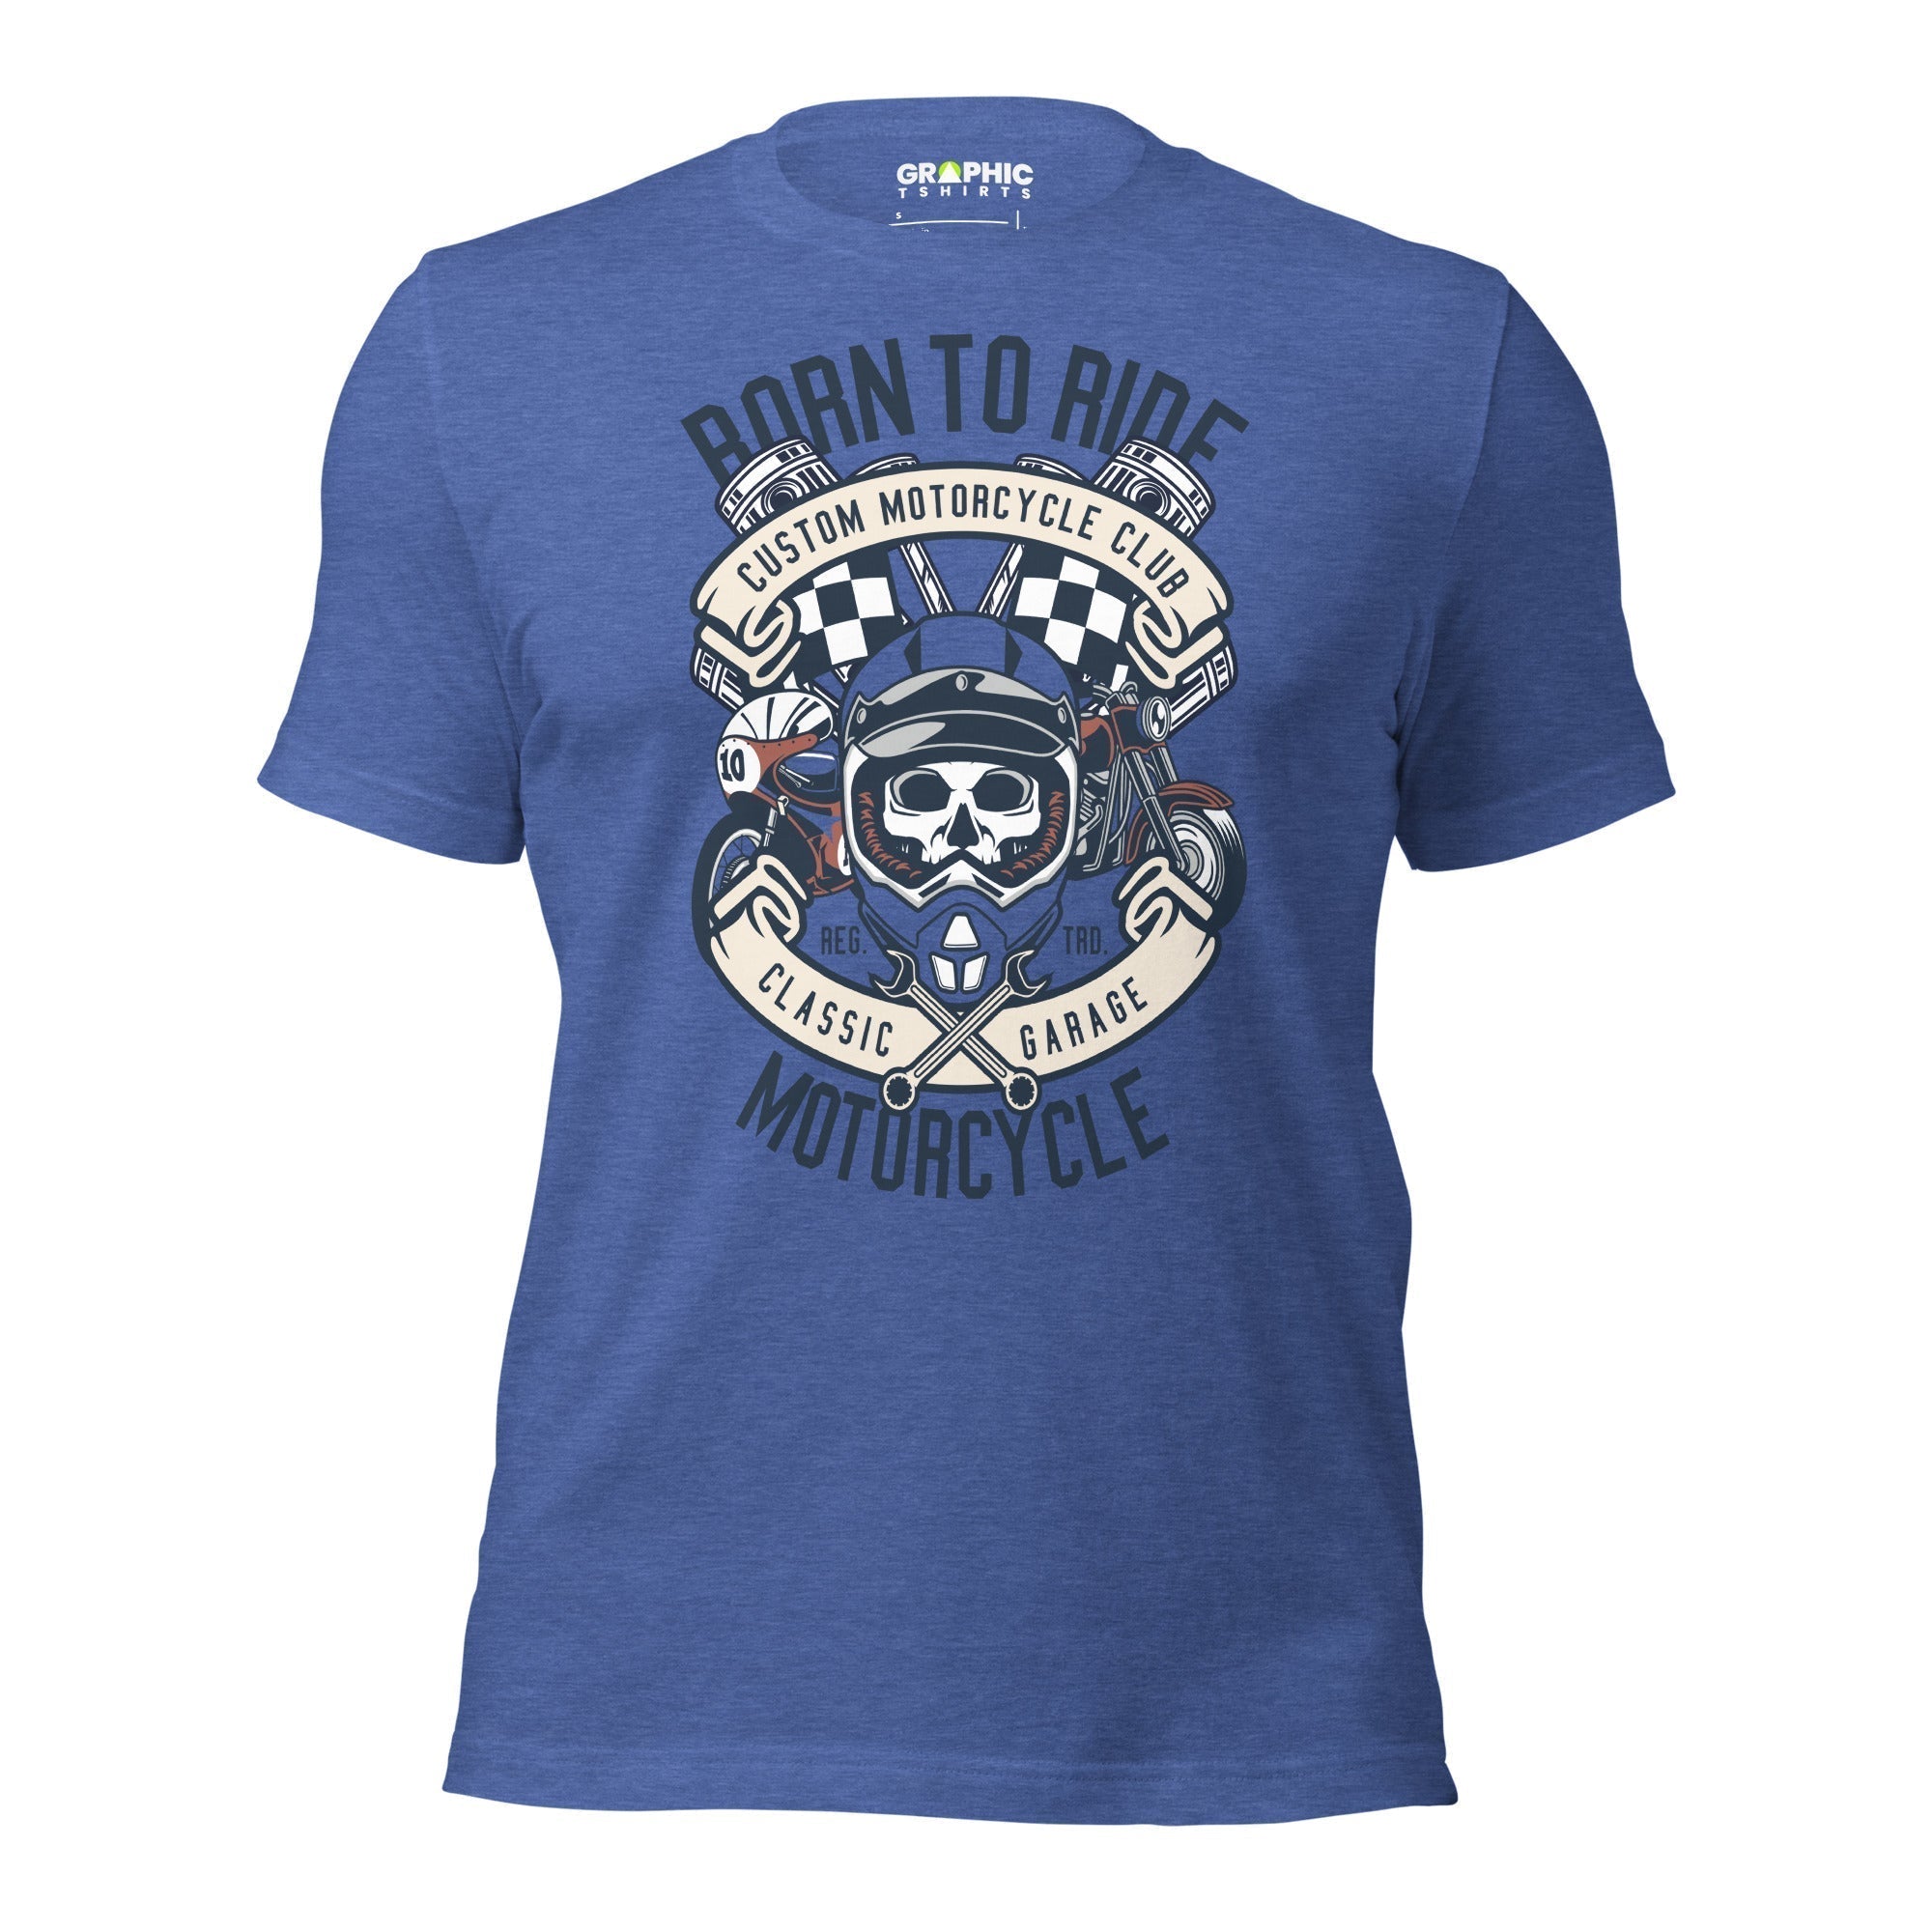 Unisex Staple T-Shirt - Born To Ride Custom Motorcycle Club Classic Garage Motorcycle - GRAPHIC T-SHIRTS